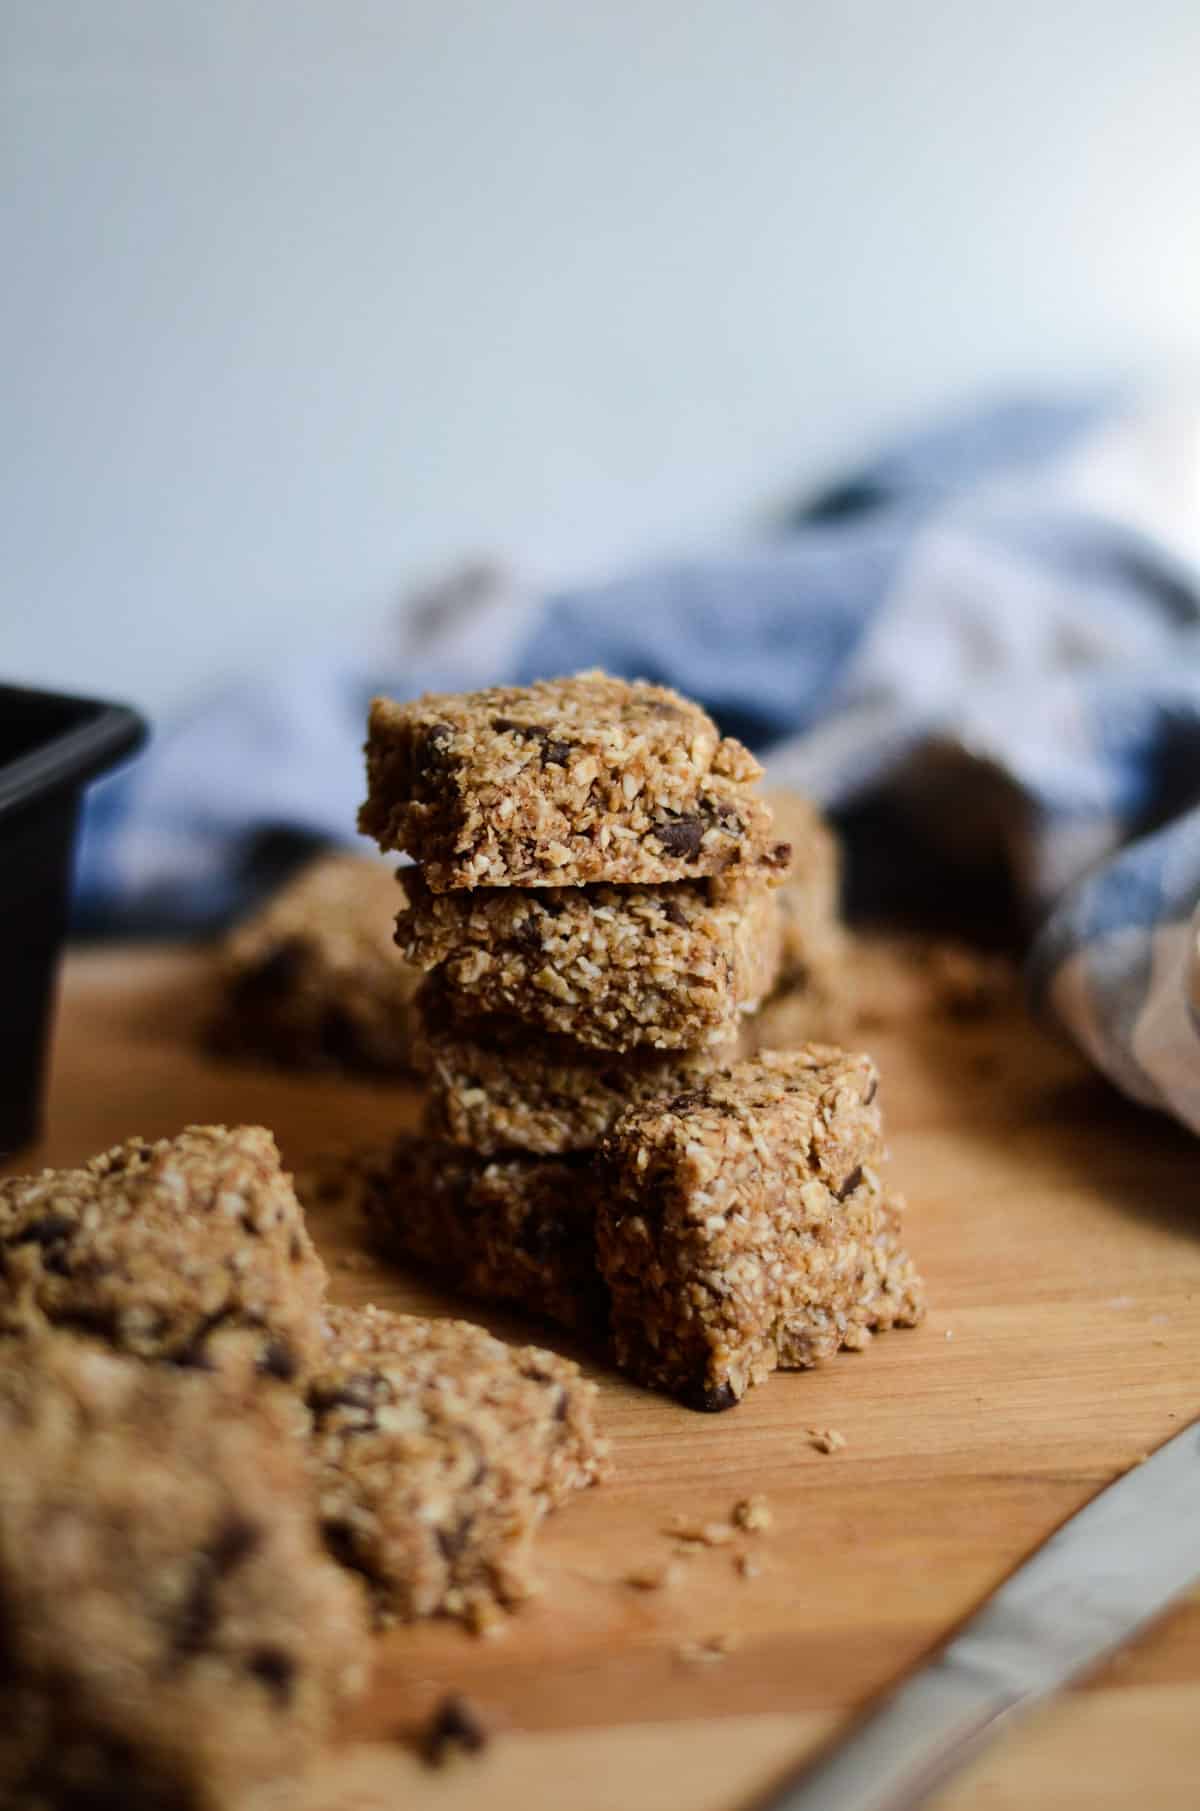 Oatmeal chunks with chocolate chips stacked on top on each other with a knife and a baking pan and tea towel beside.